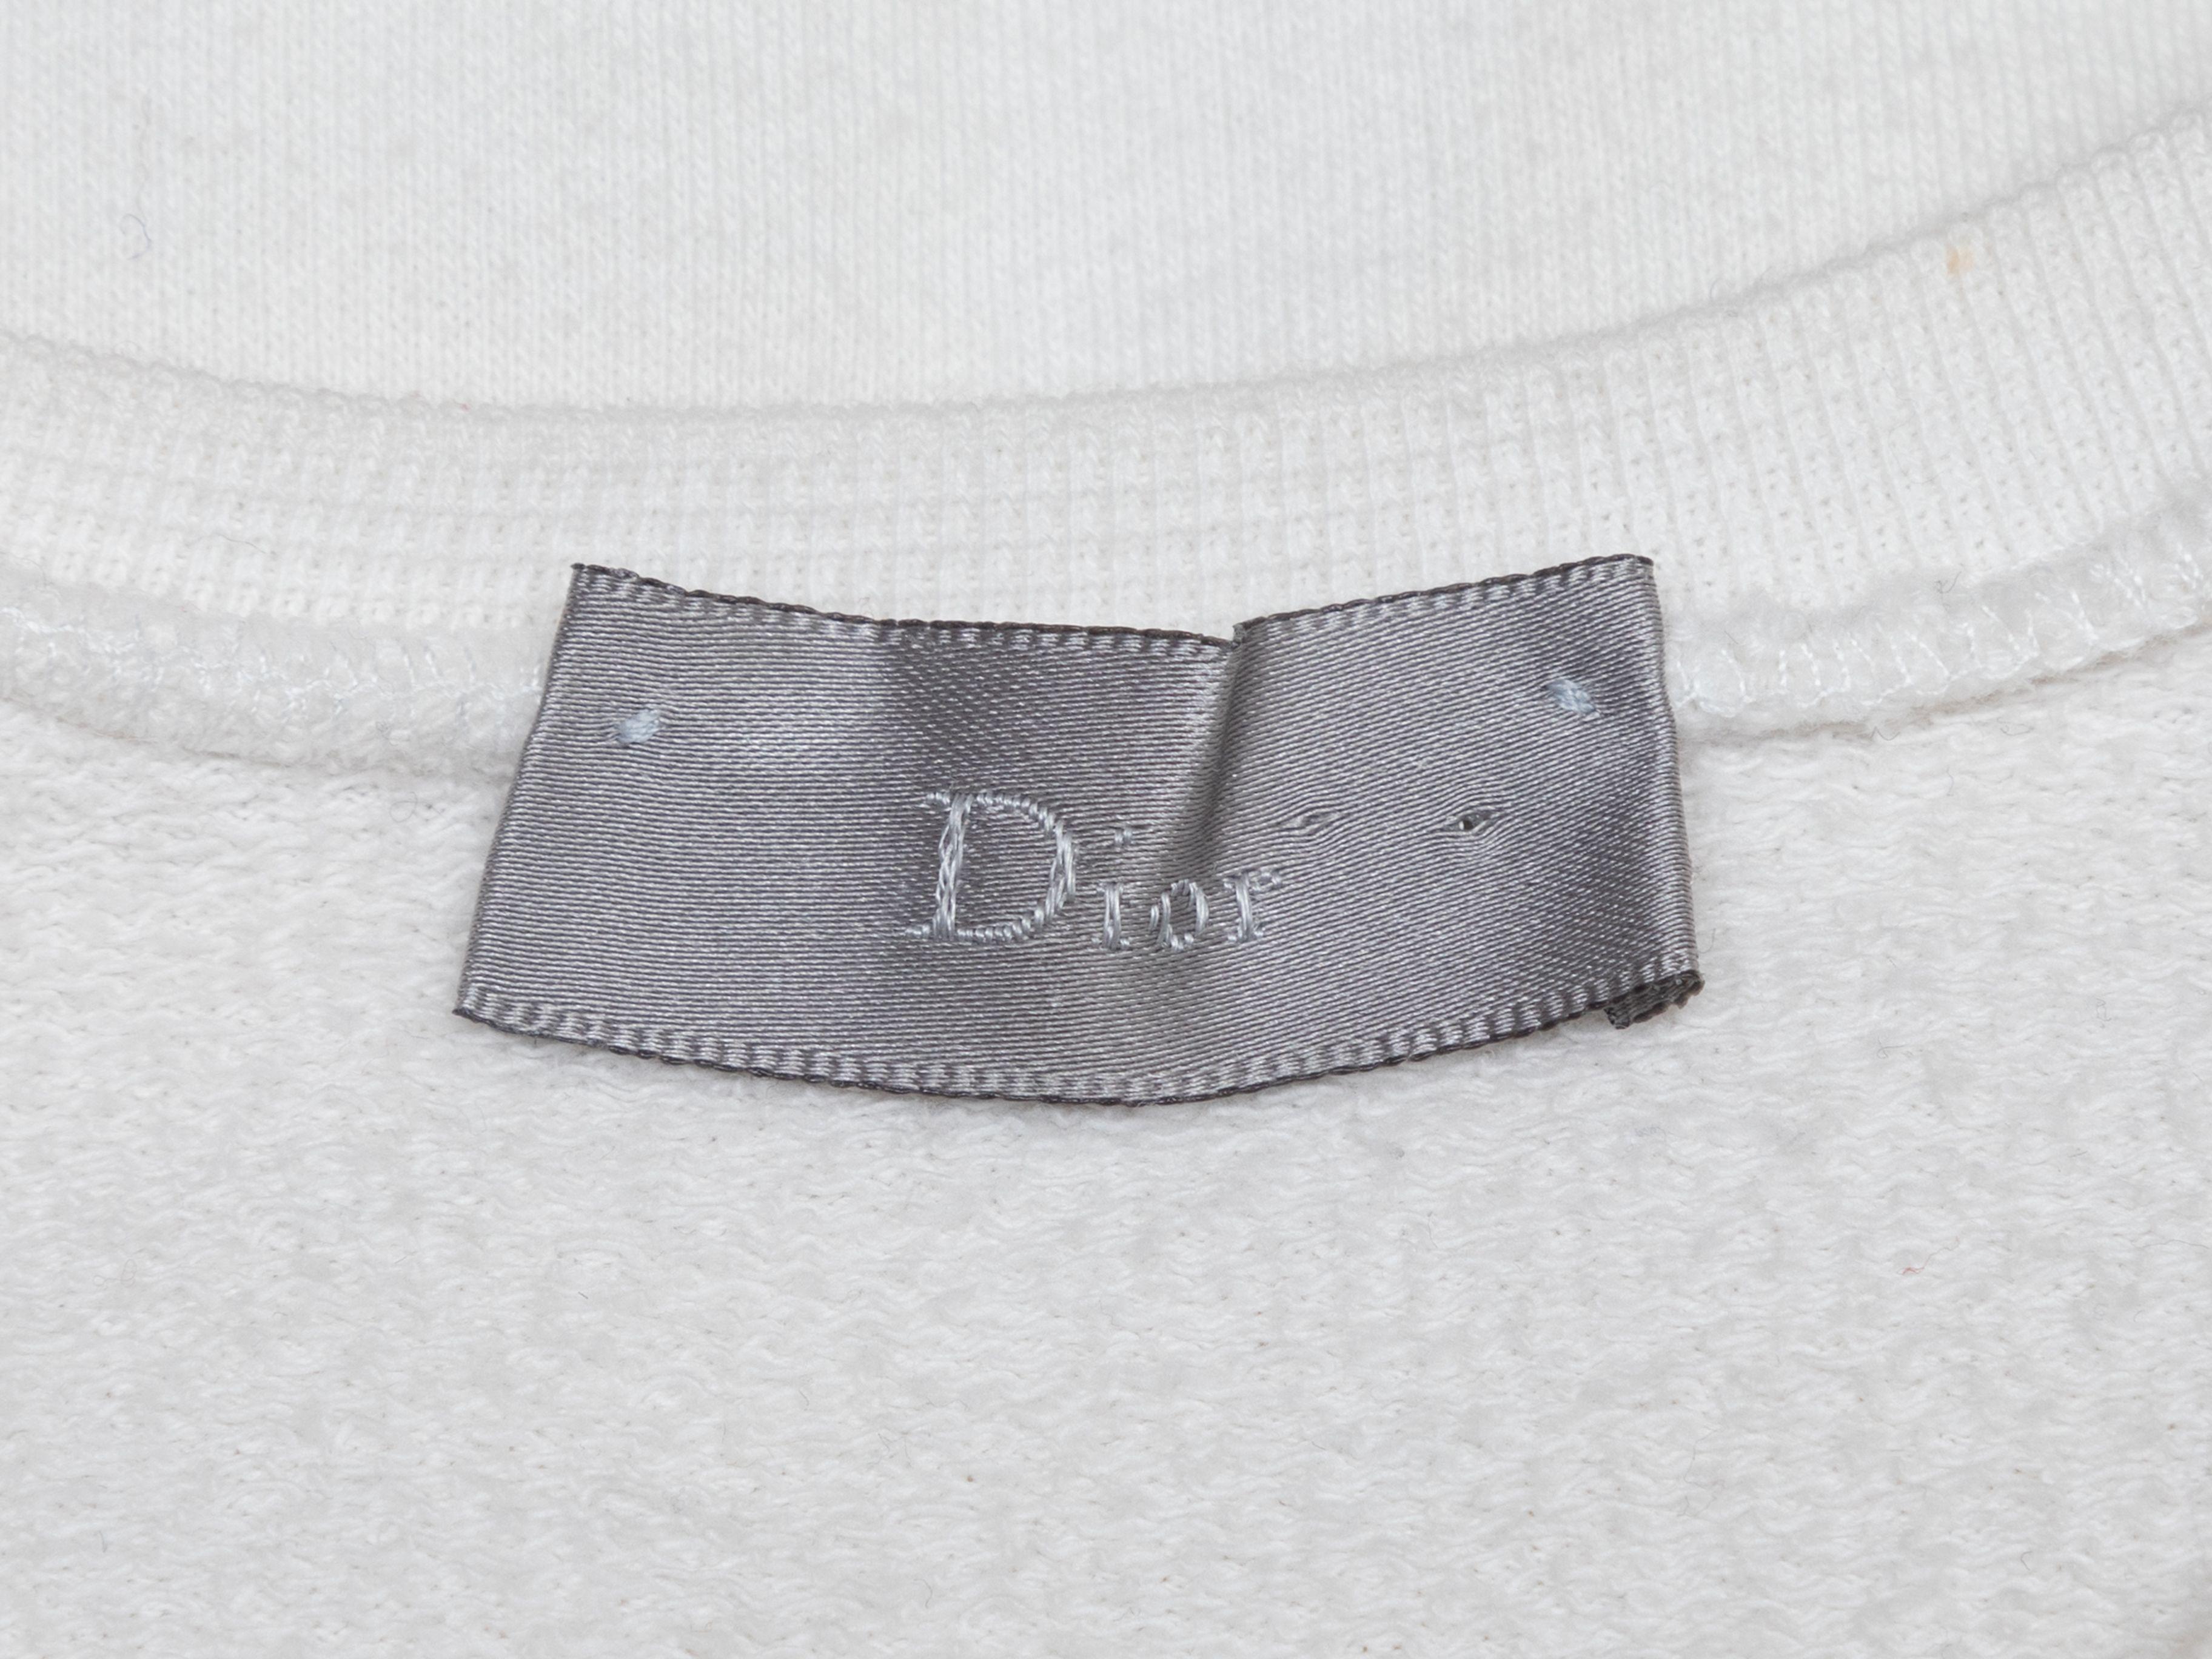 Product Details: White and grey 'I Think It's U, I Can't Be Sure' sweatshirt by Dior Homme. From the Spring/Summer 2006 Collection. Crew neck. 34